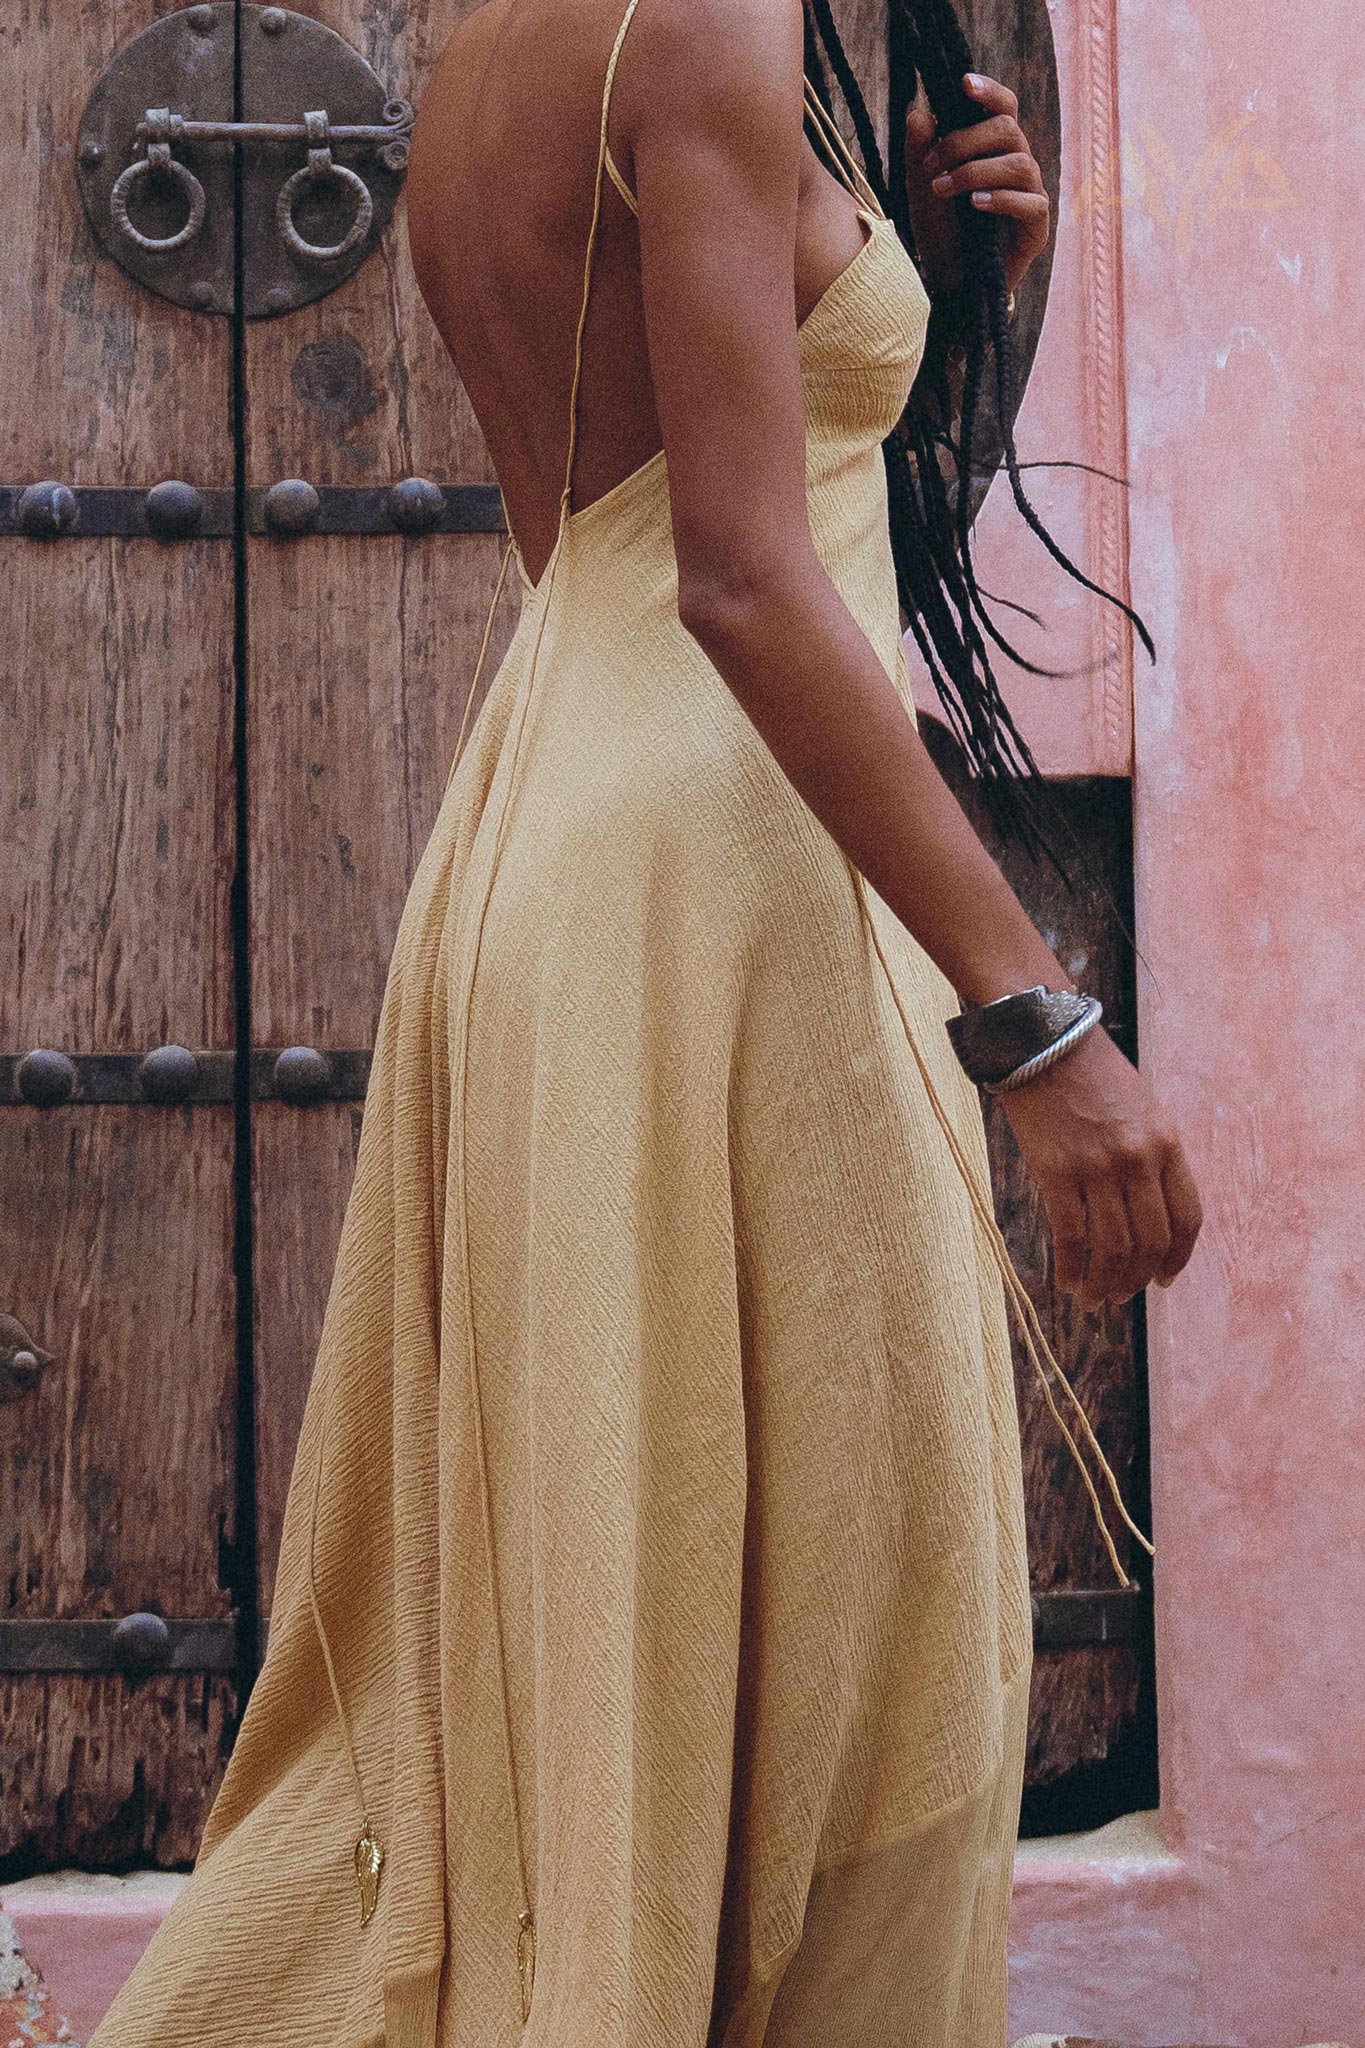 Get the look with Aya Sacred Wear's powder yellow dress.